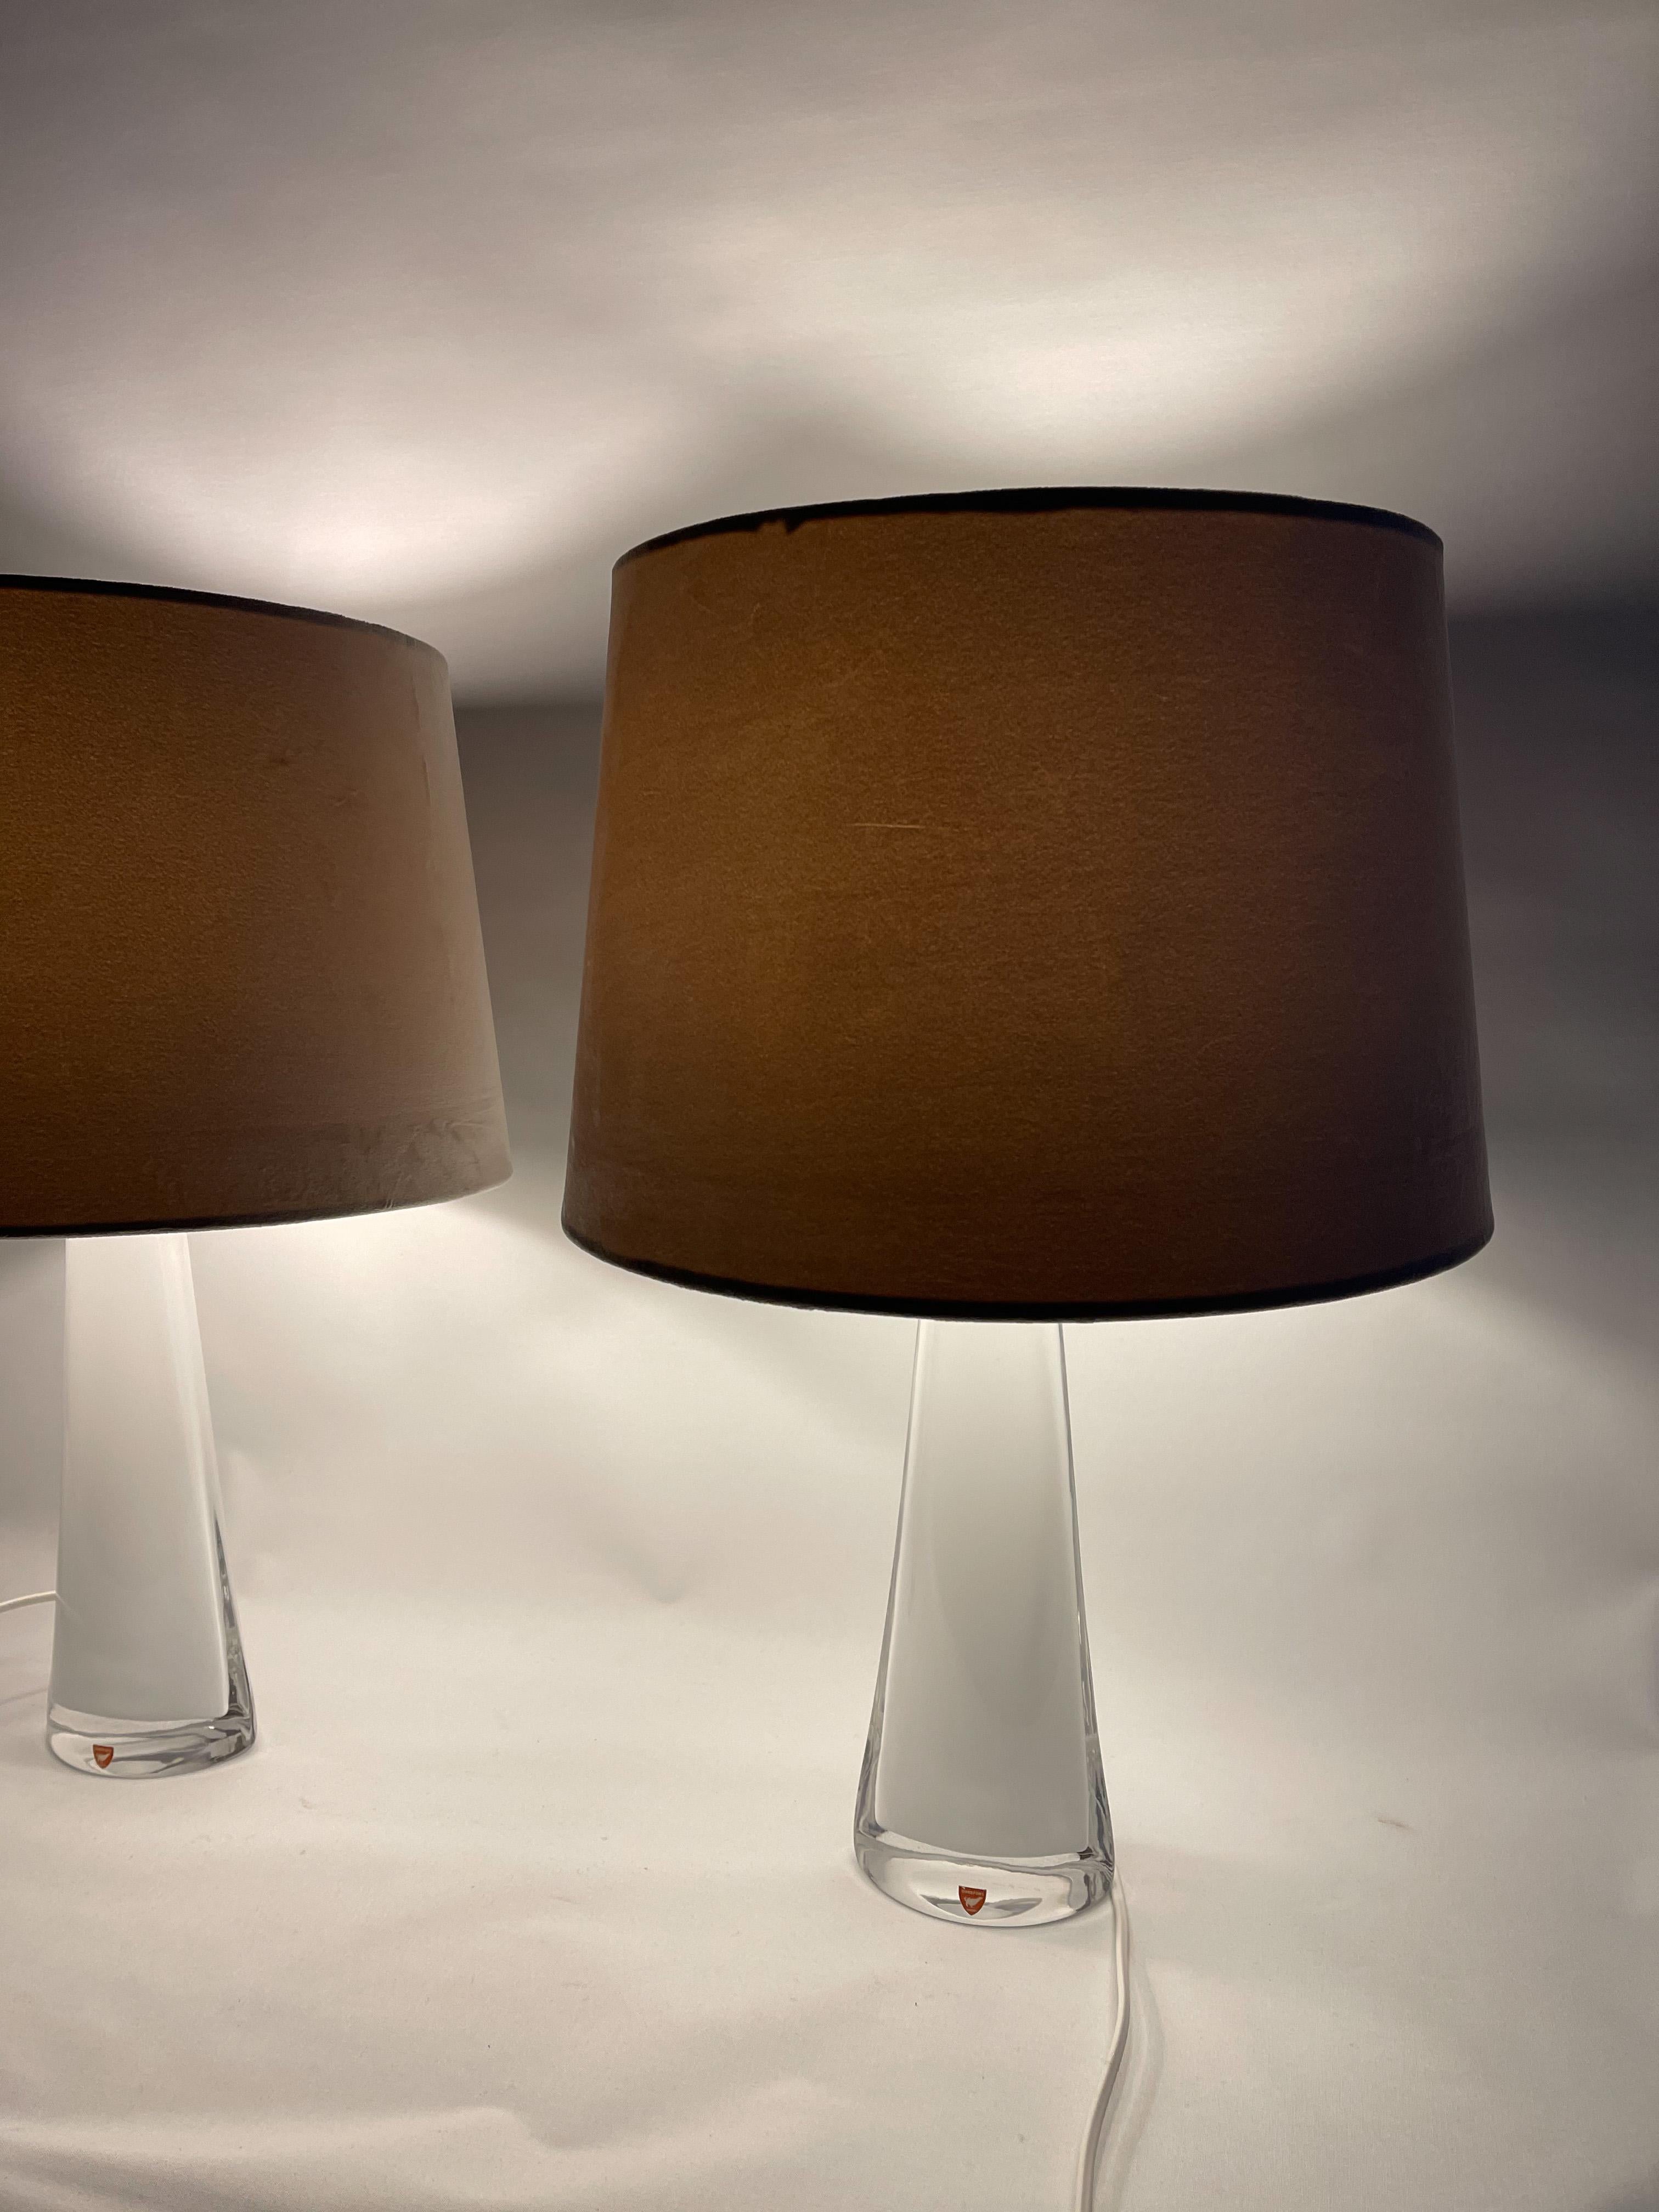 Mid-20th Century Midcentury Table Lamps by Carl Fagerlund for Orrefors Sweden RD, 1566 For Sale